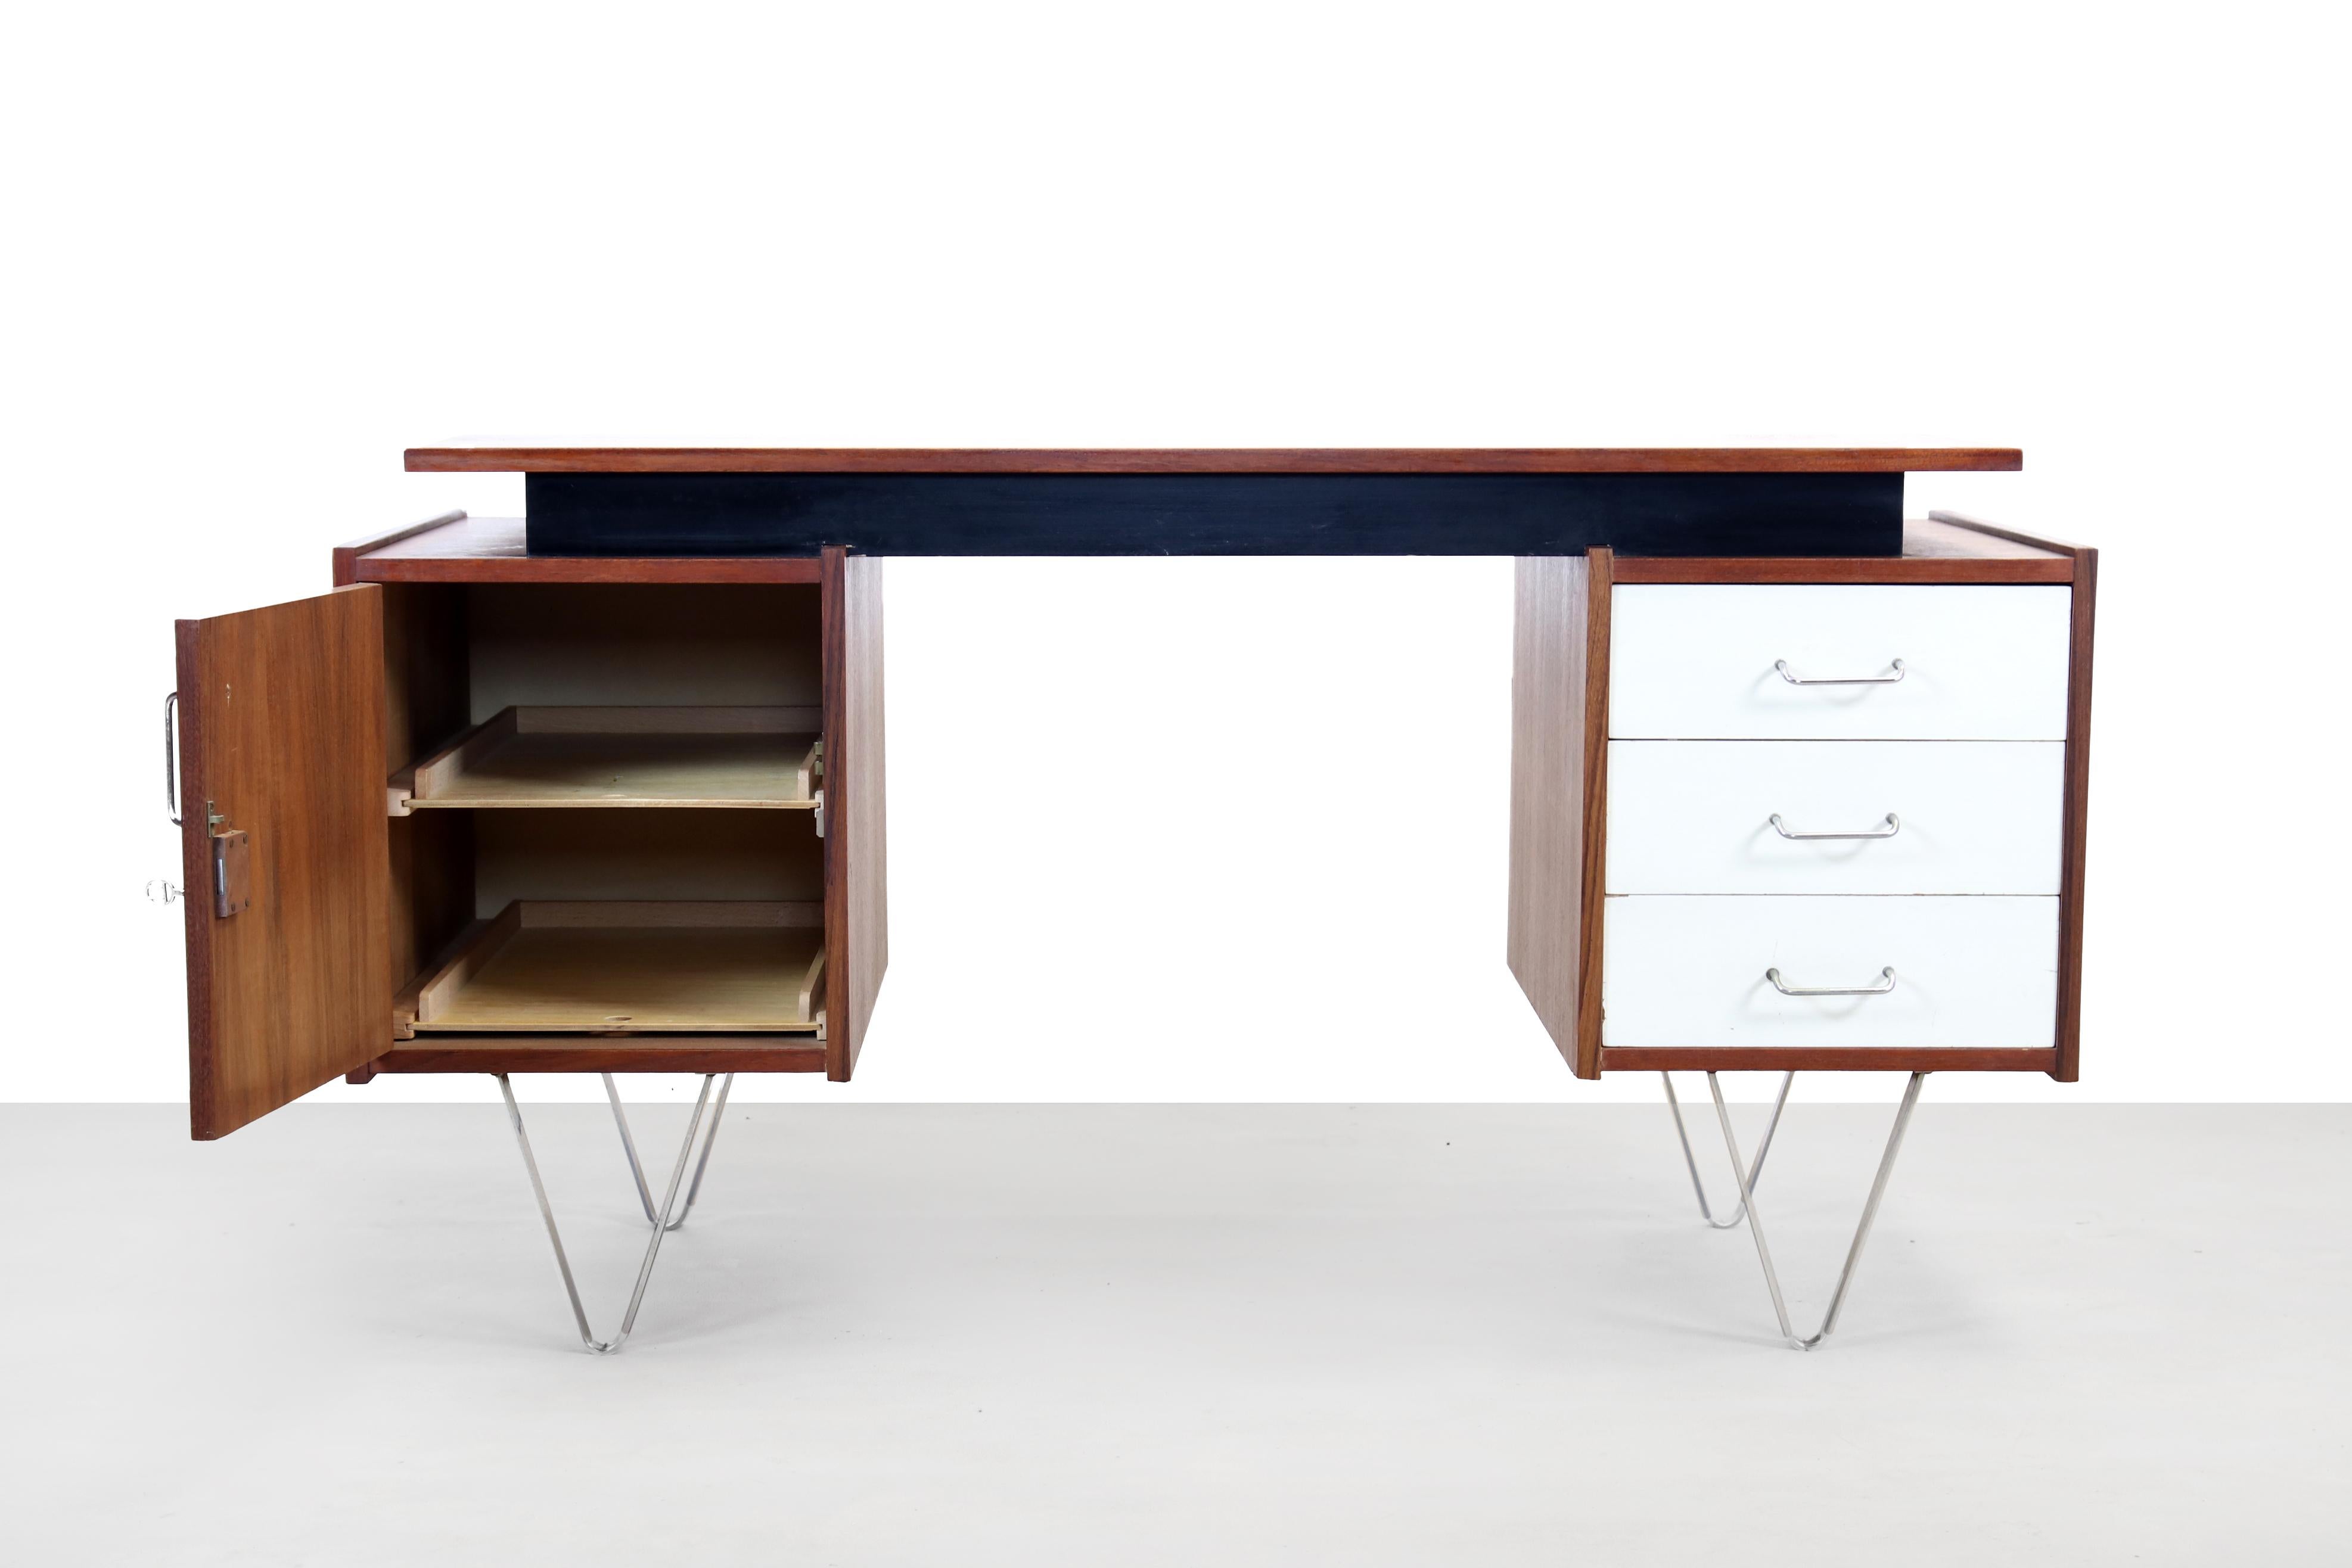 Minimalist and stylish desk designed by Cees Braakman for UMS Pastoe, The Netherlands in the early 1960s. This desk has a drawer unit with 3 drawers with white painted fronts on the right side and a compartment with a teak door on the left side. The